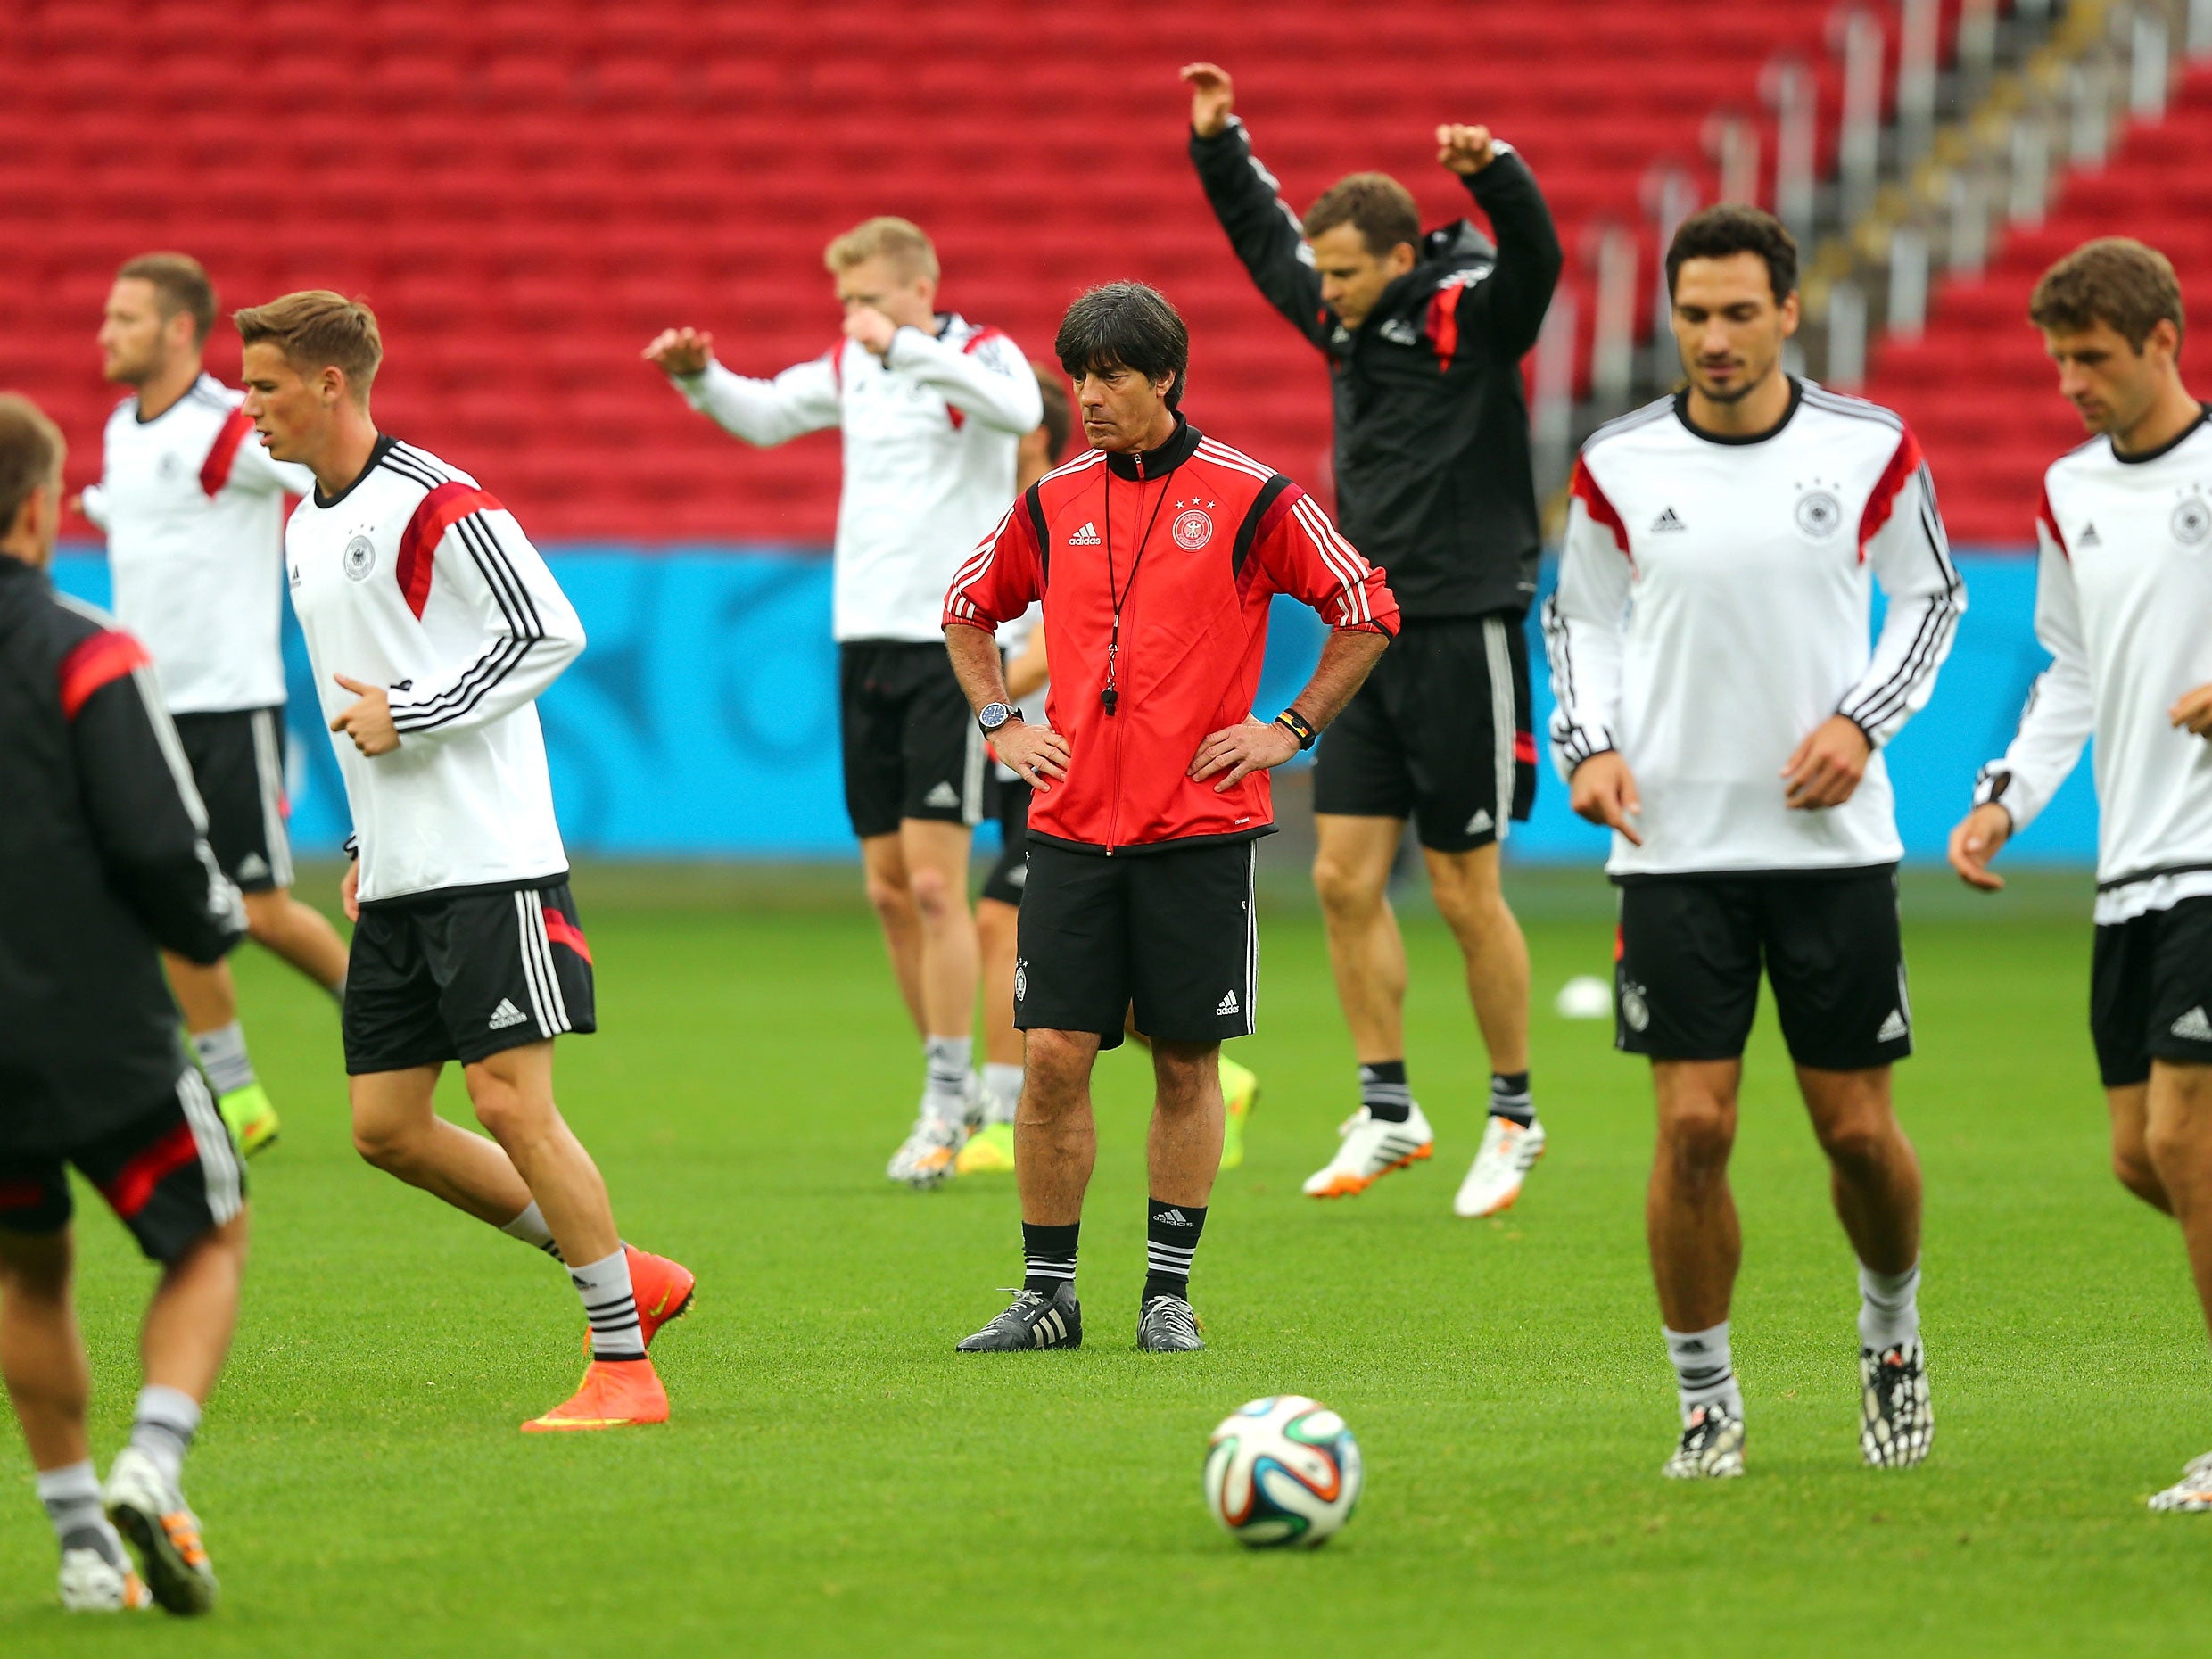 Joachim Loew, head coach of Germany gestures during the German national team training at Estadio Beira-Rio on June 29, 2014 in Porto Alegre, Brazil.